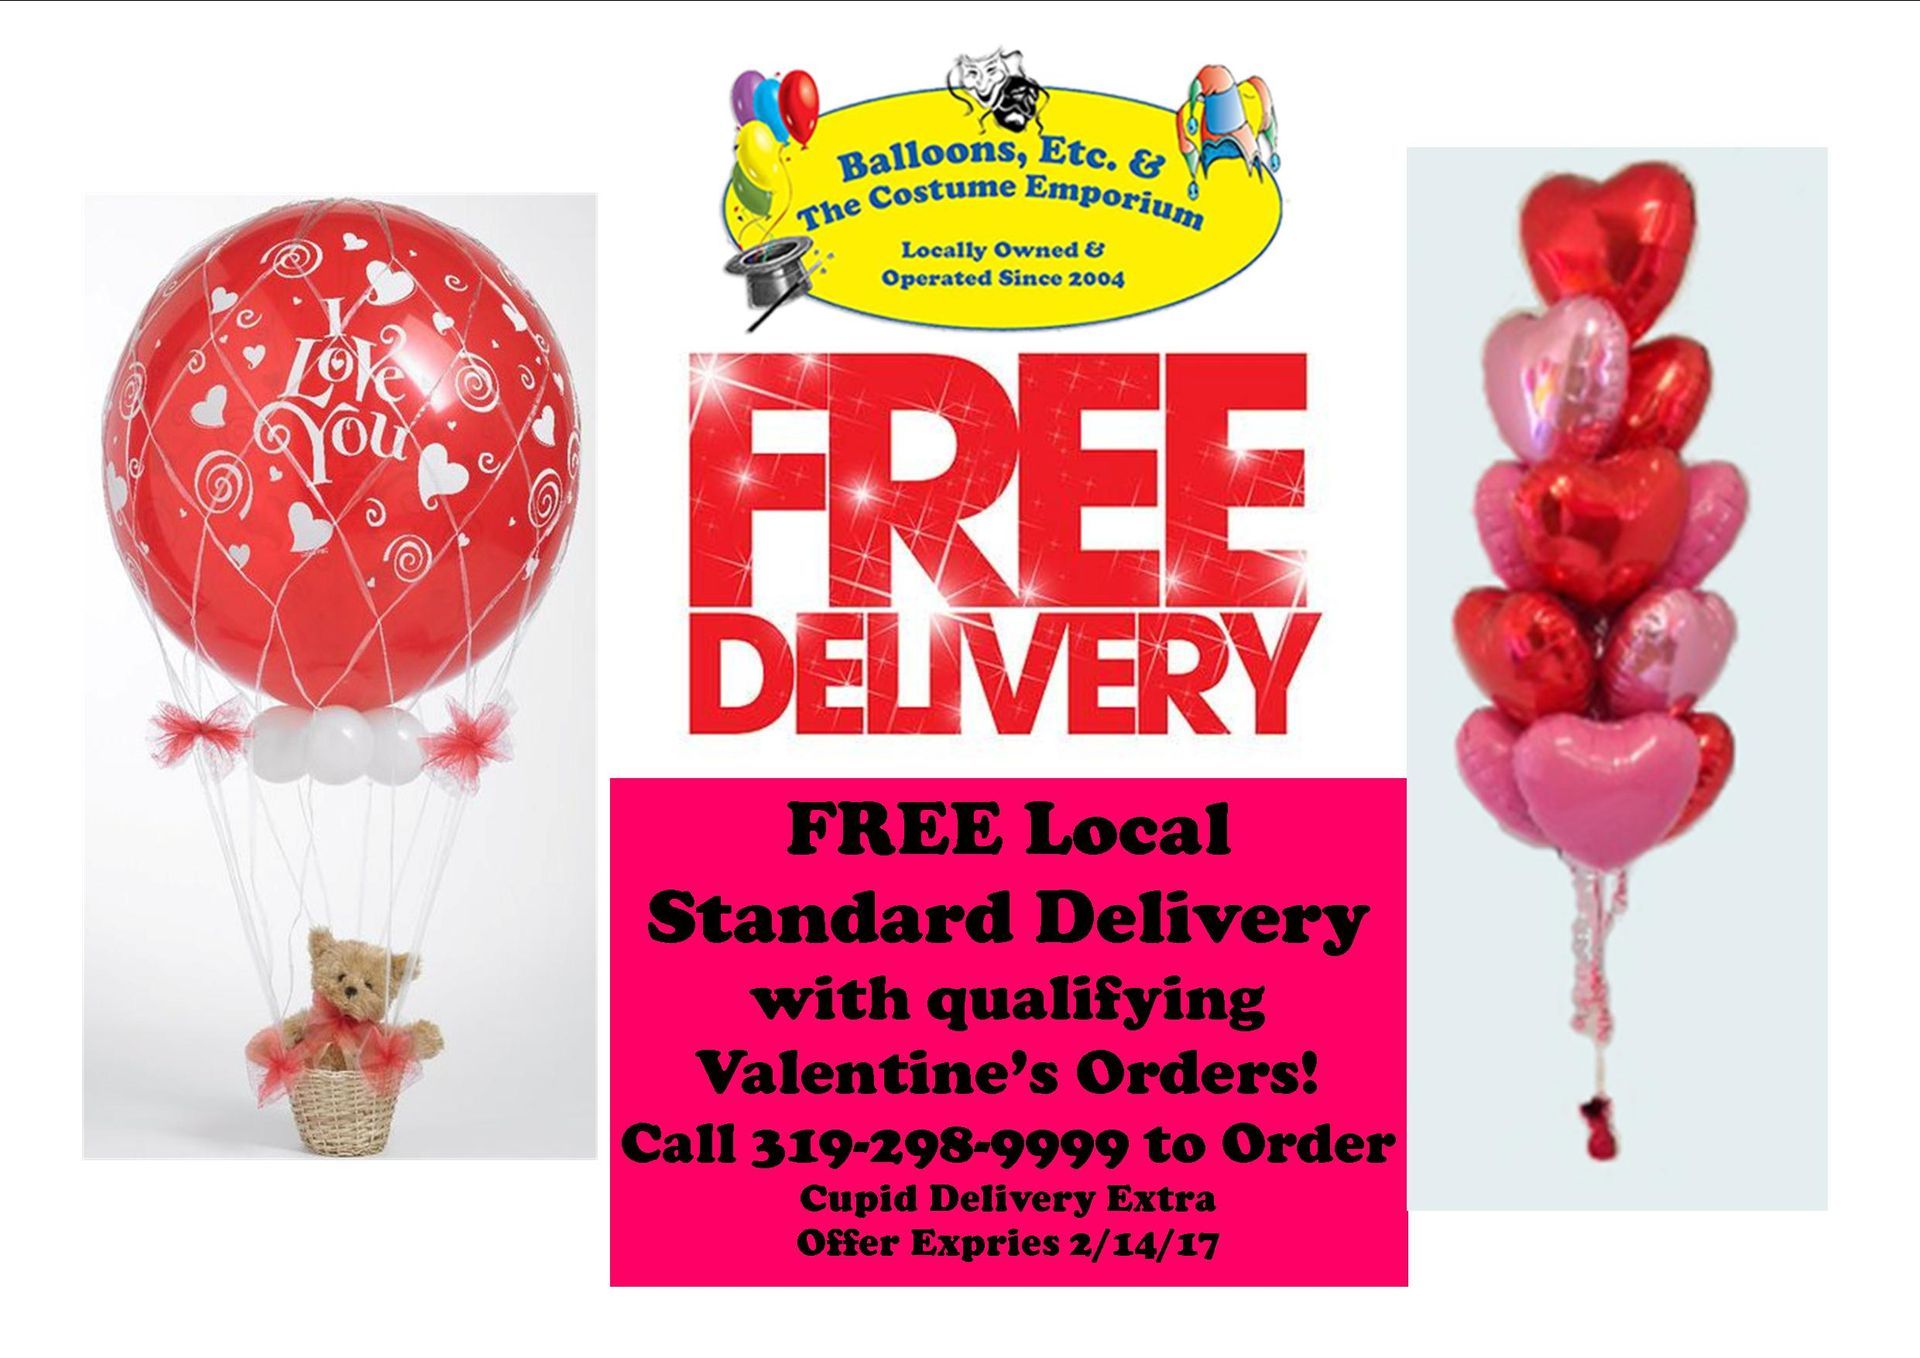 an advertisement for free local standard delivery with qualifying valentine 's orders